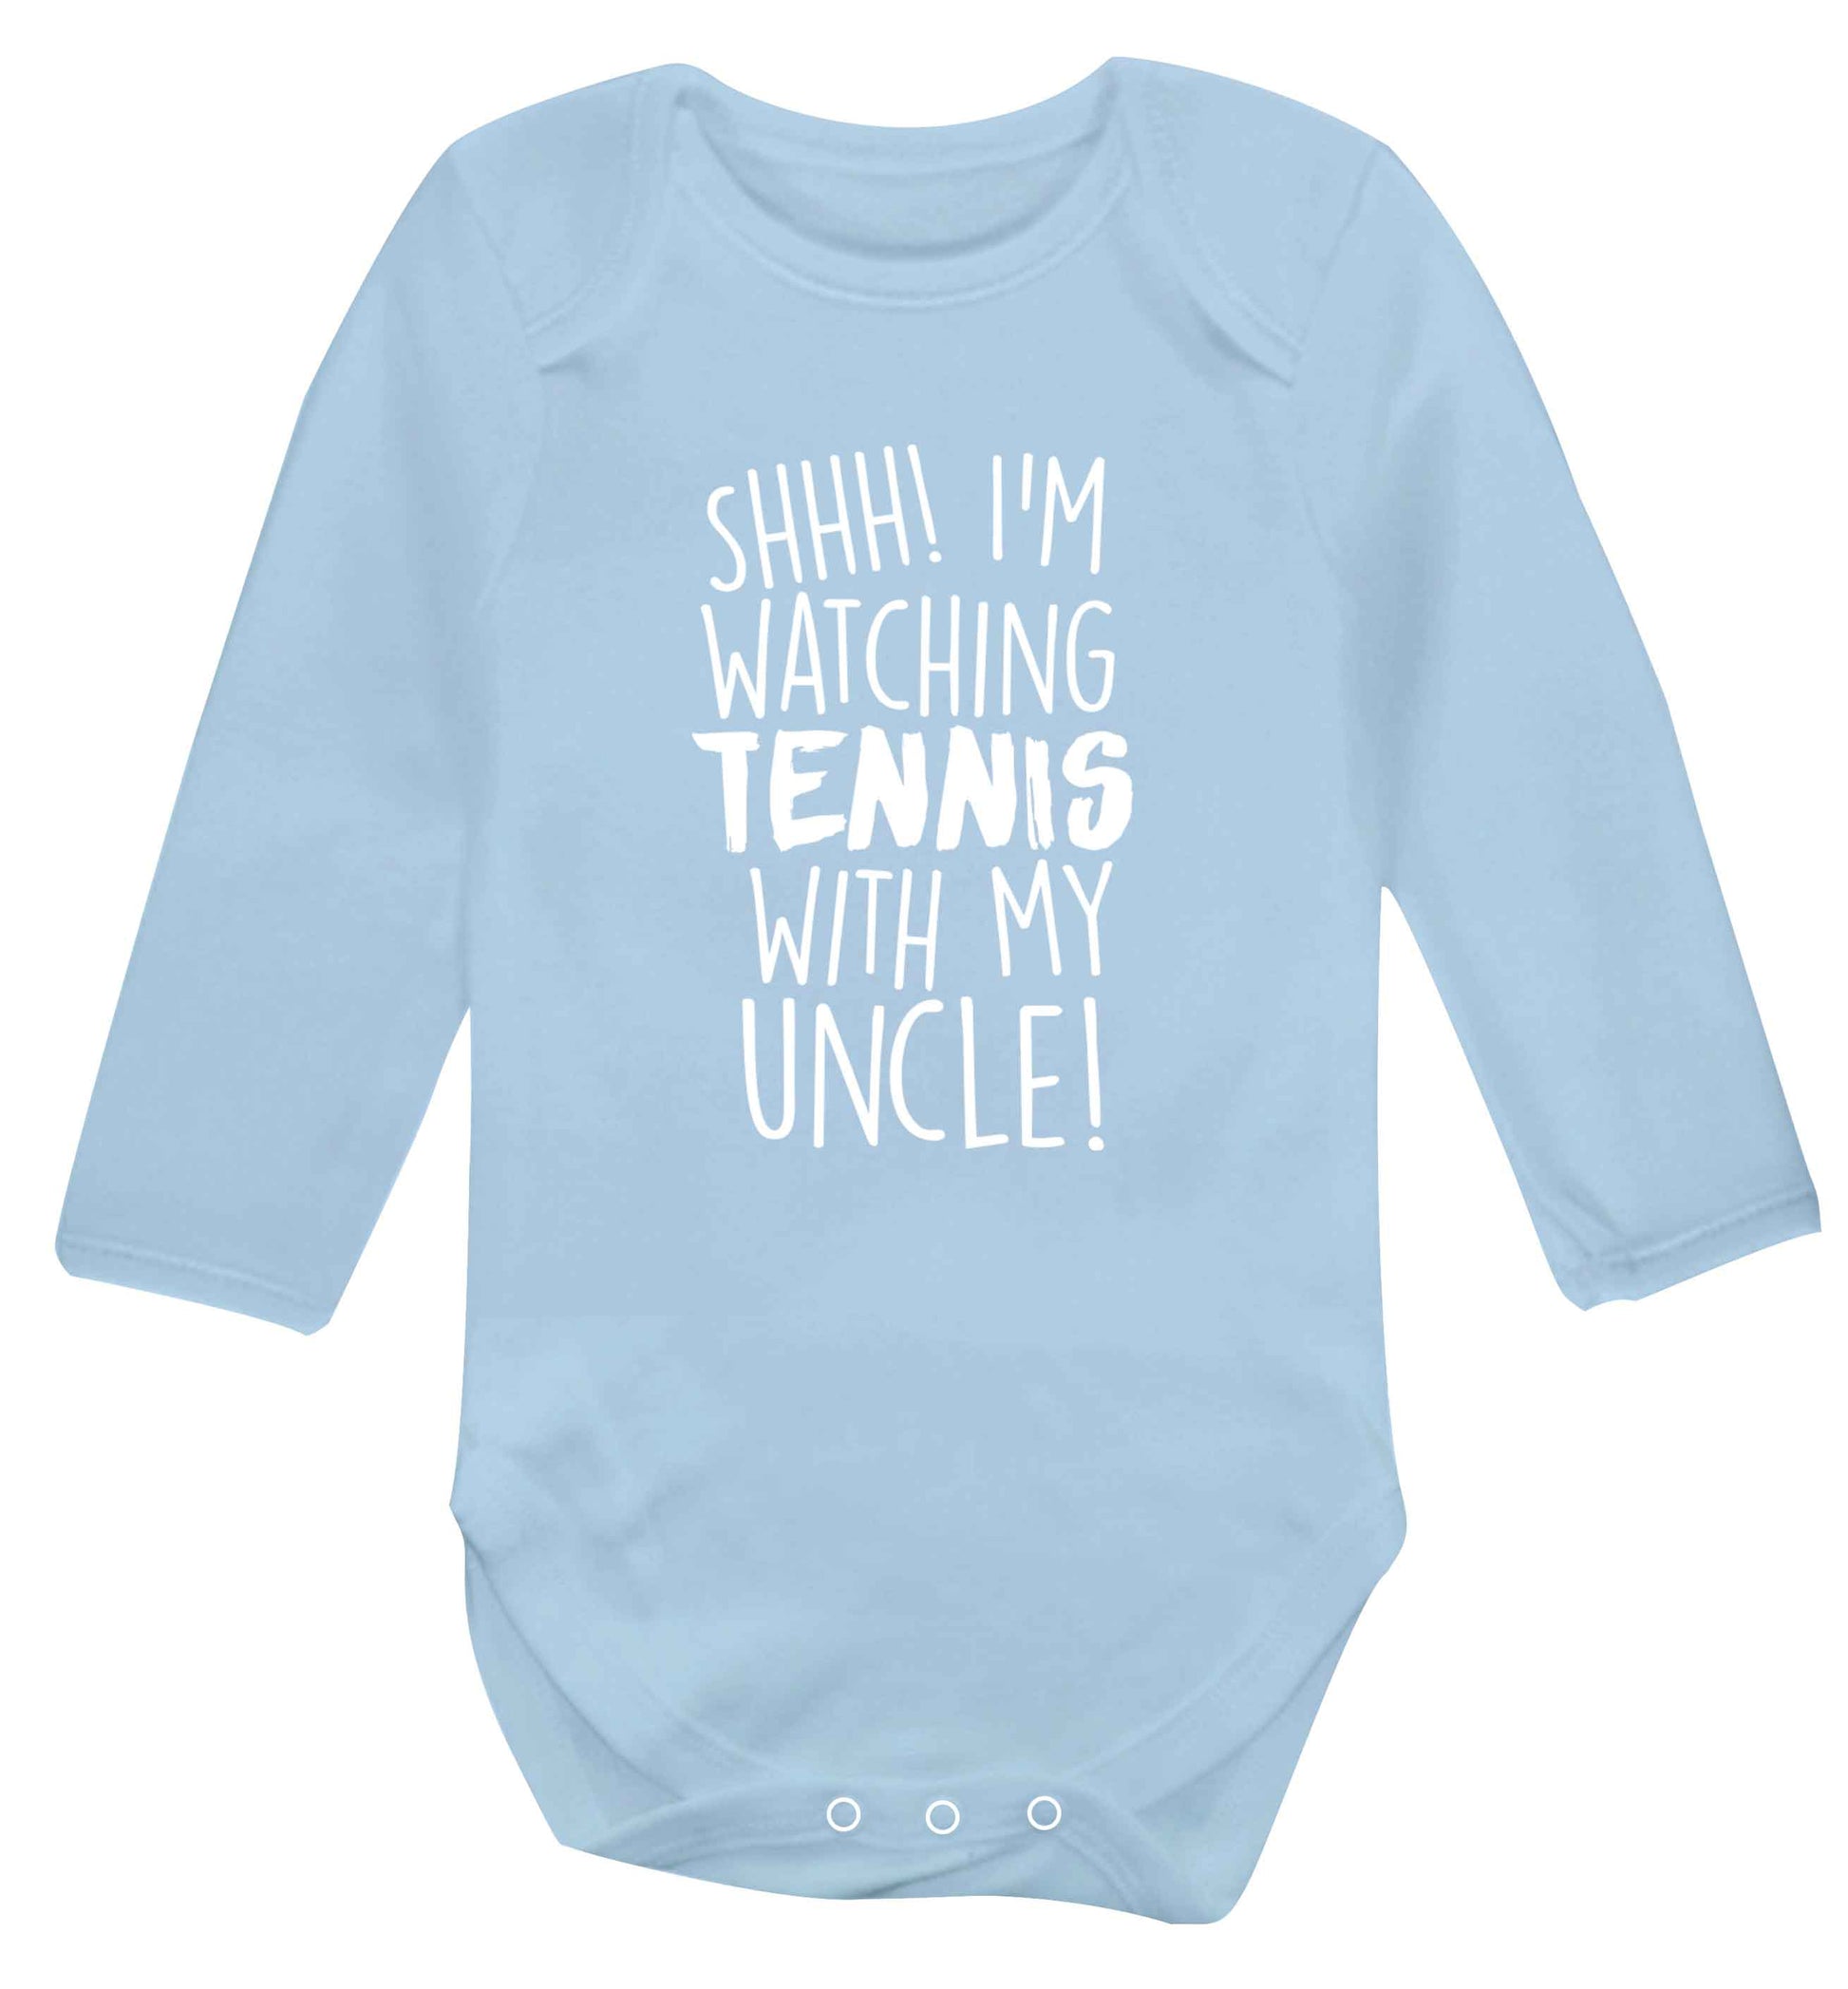 Shh! I'm watching tennis with my uncle! Baby Vest long sleeved pale blue 6-12 months